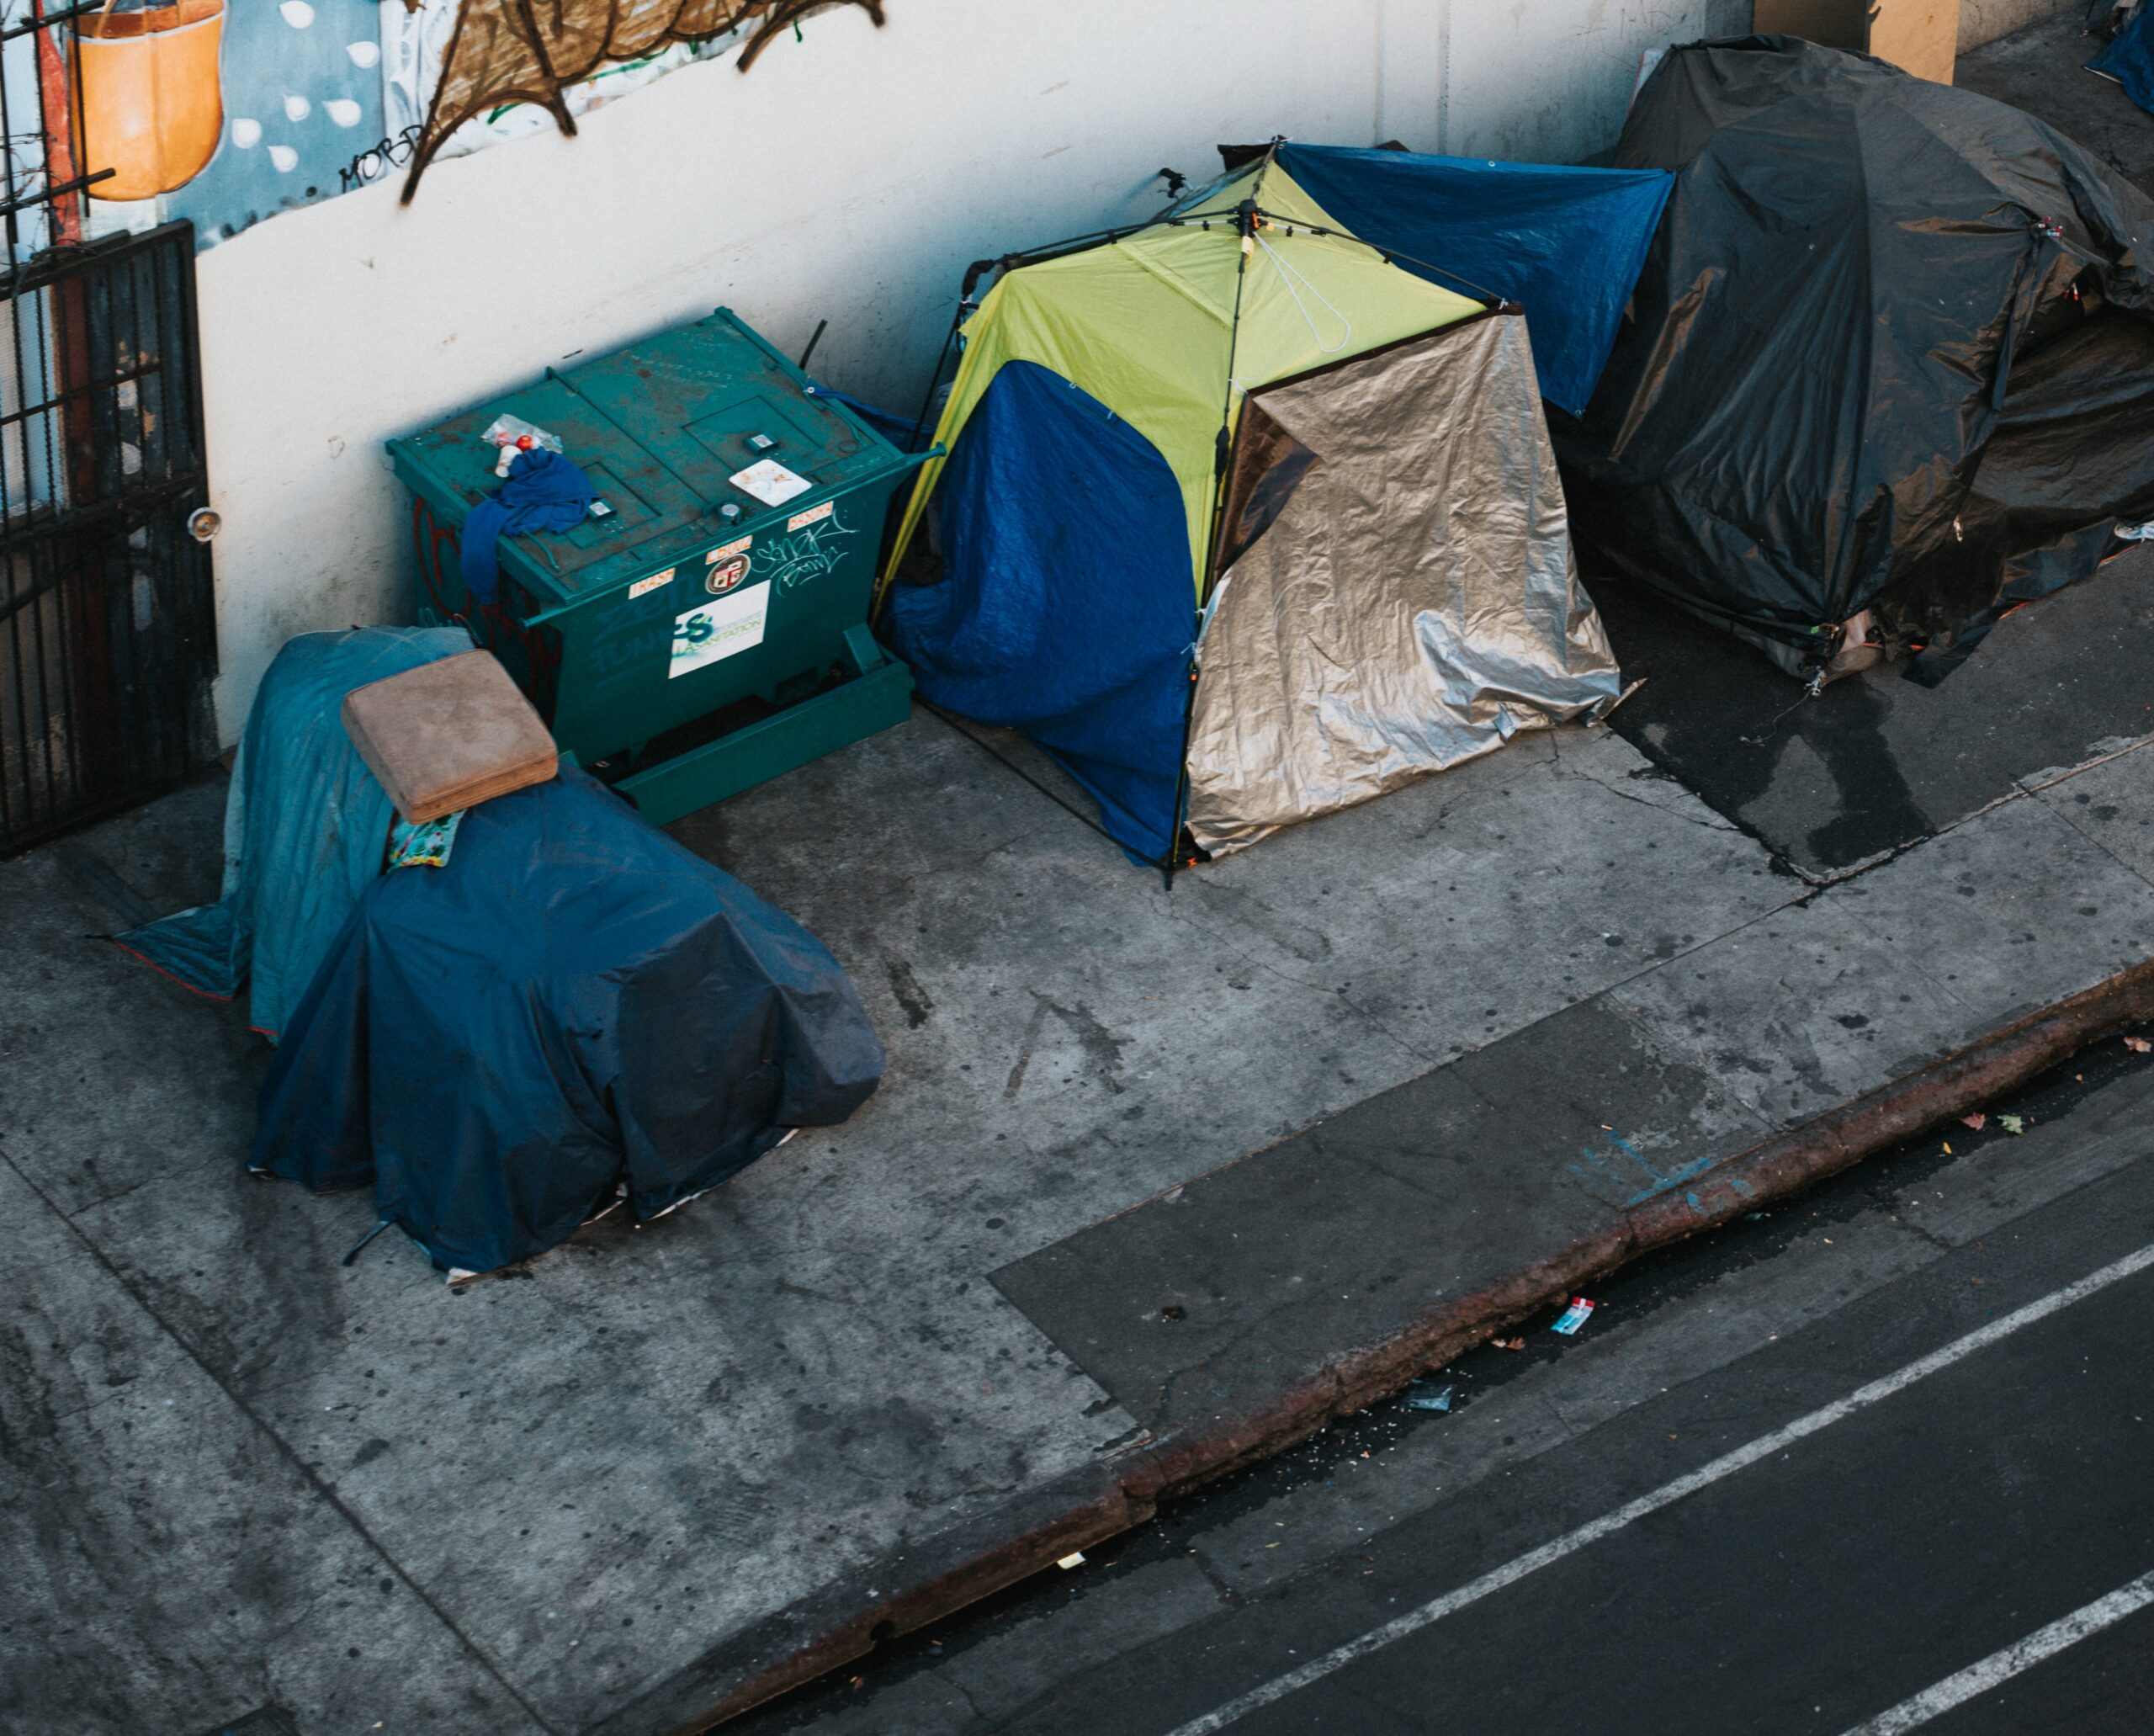 Homelessness 101: Who, What, When, Where